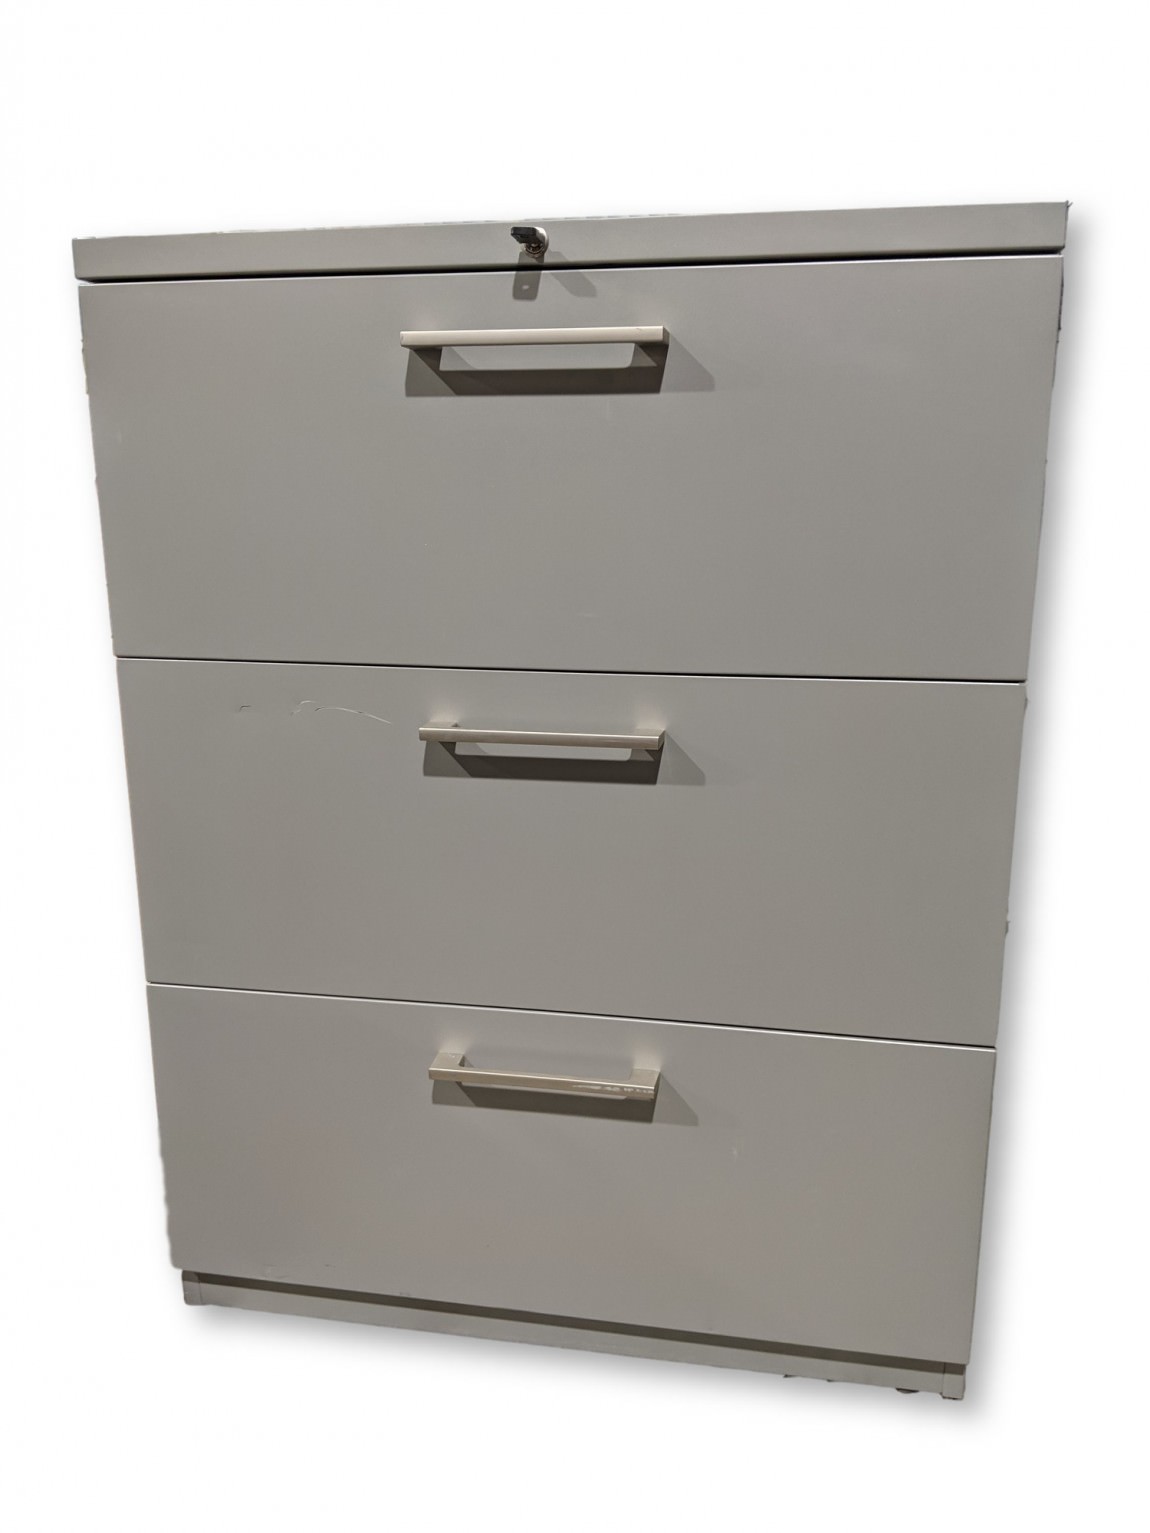 Haworth 3 Drawer Lateral Filing Cabinet - 30 Inch Wide